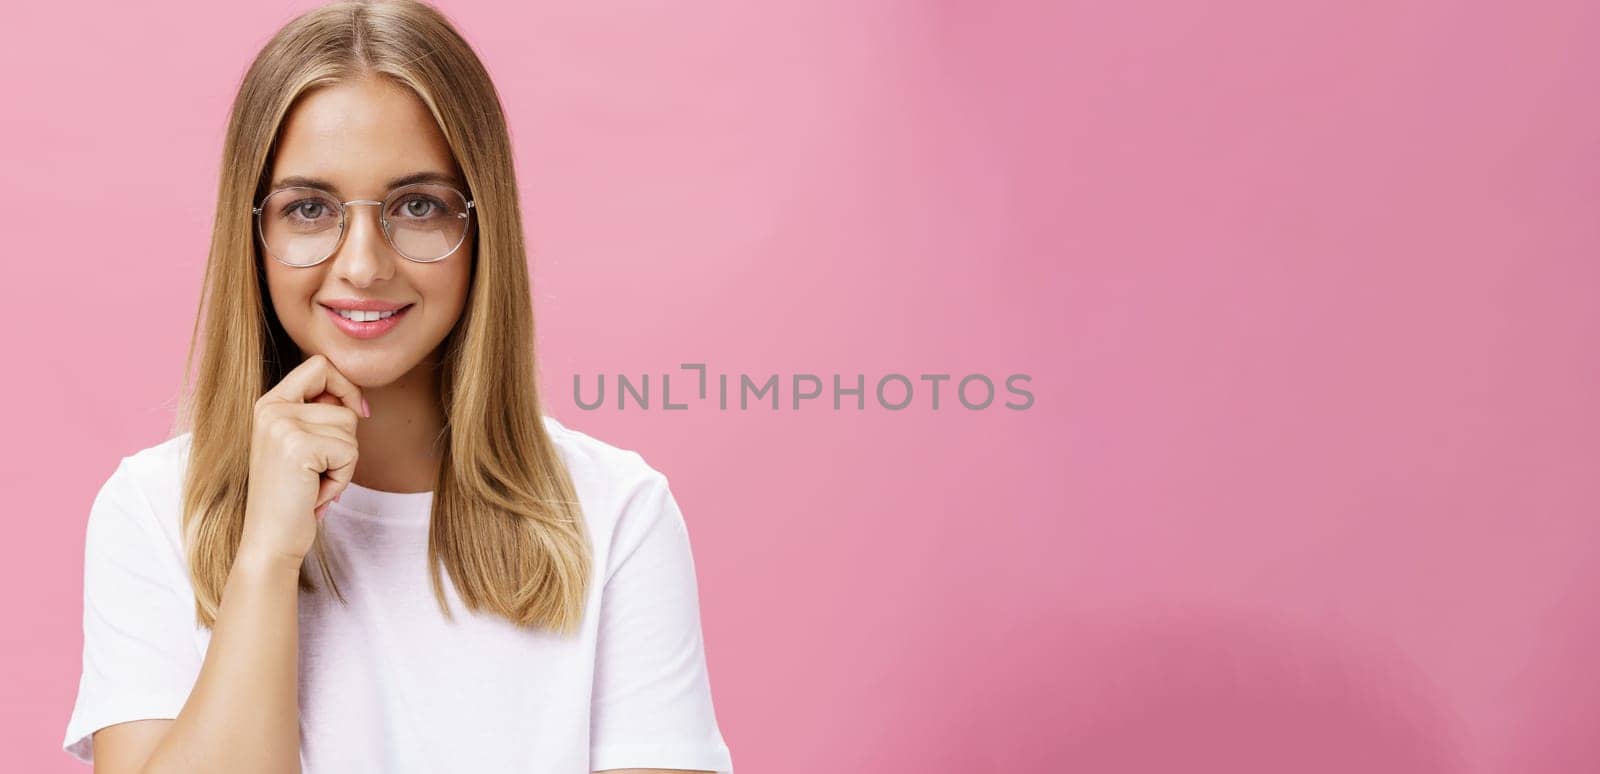 Woman listen with interest and smart look touching chin in thoughtful gesture smiling pleased, amused, looking self-assured at camera with intelligent expression over pink background, wearing glasses by Benzoix